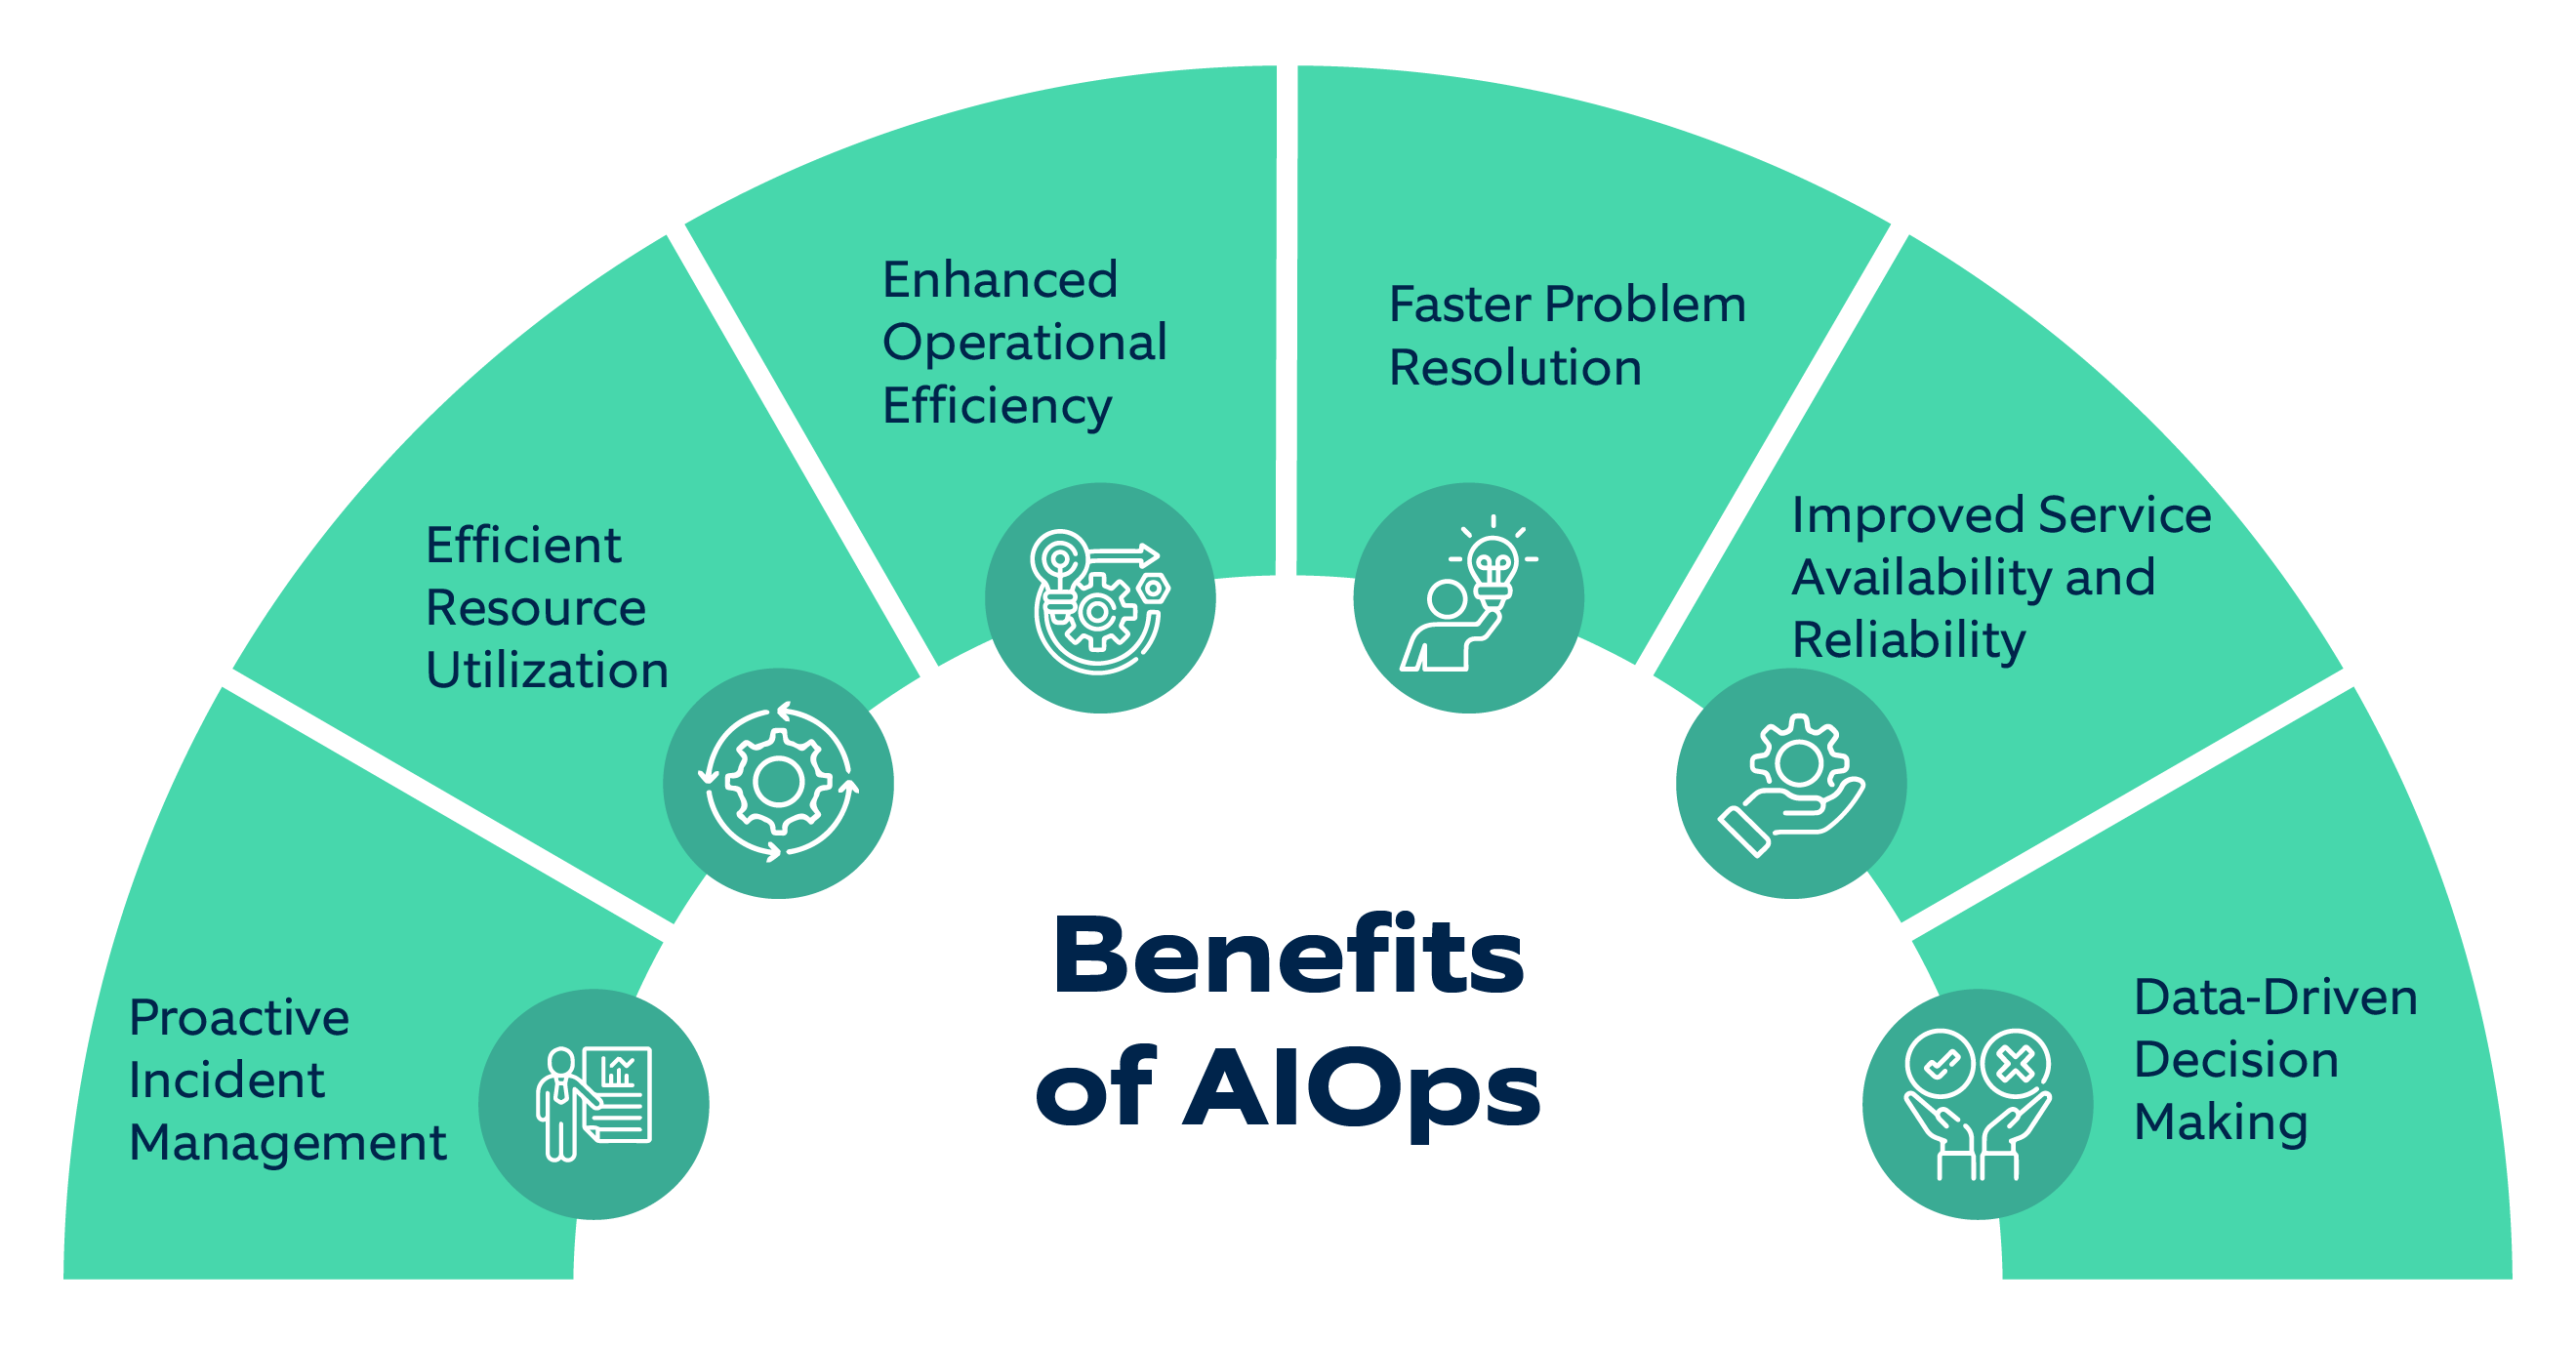 Benefits of AIOps